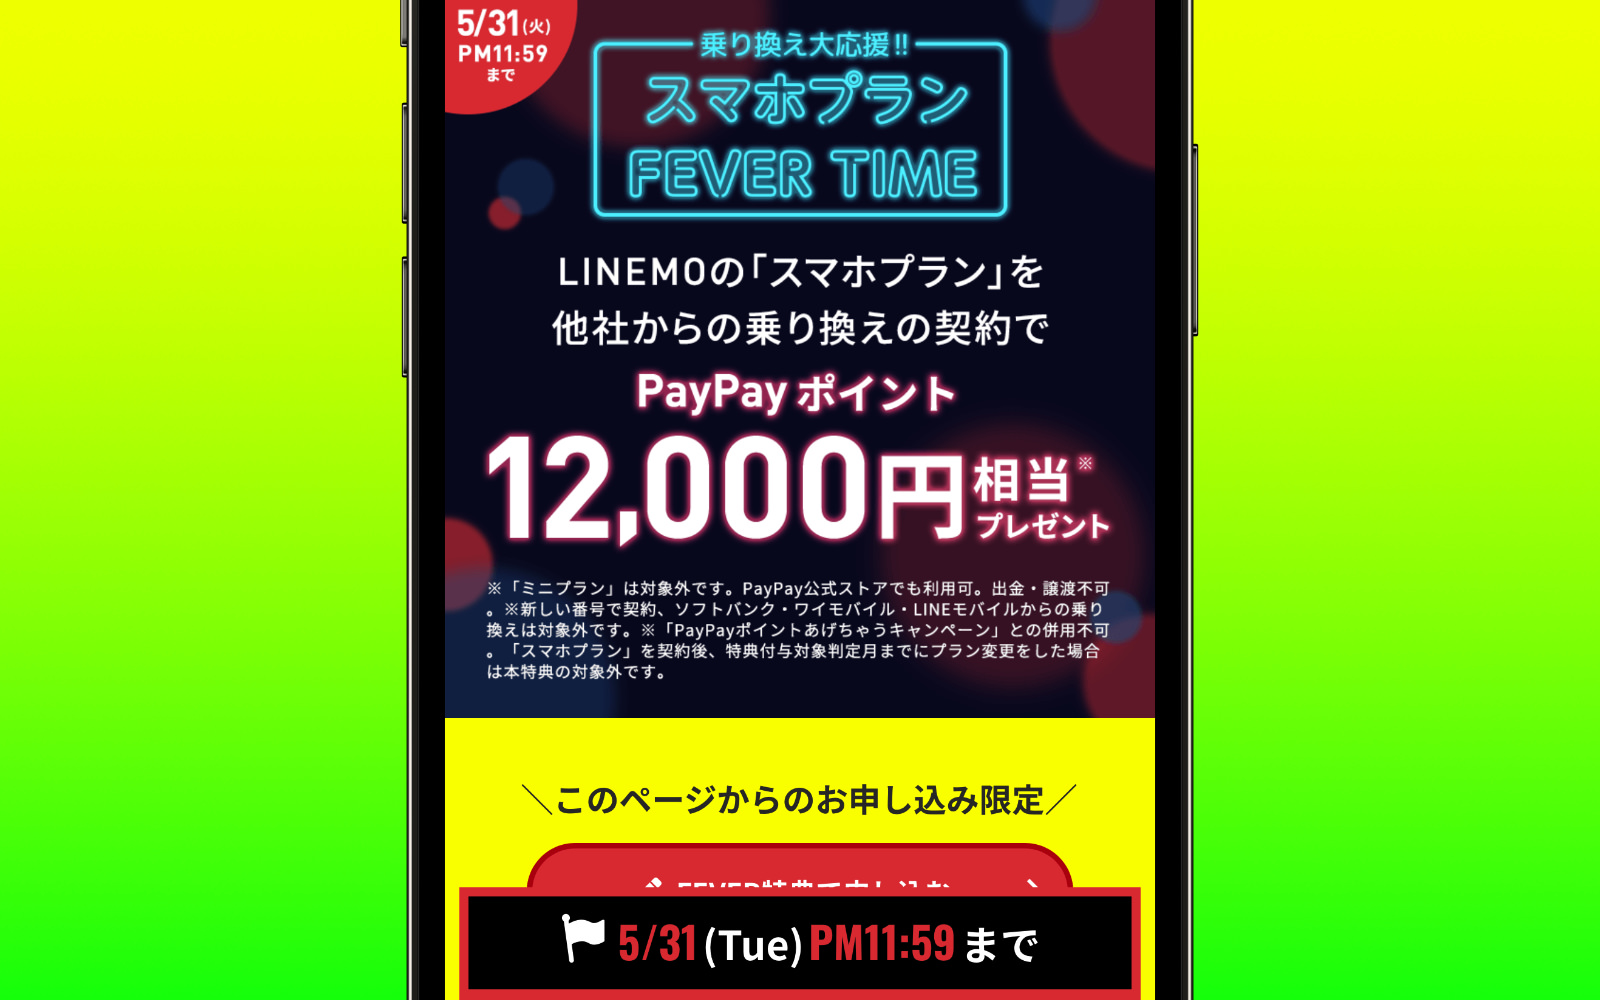 LINEMO Smartphone Fever Time Campaign